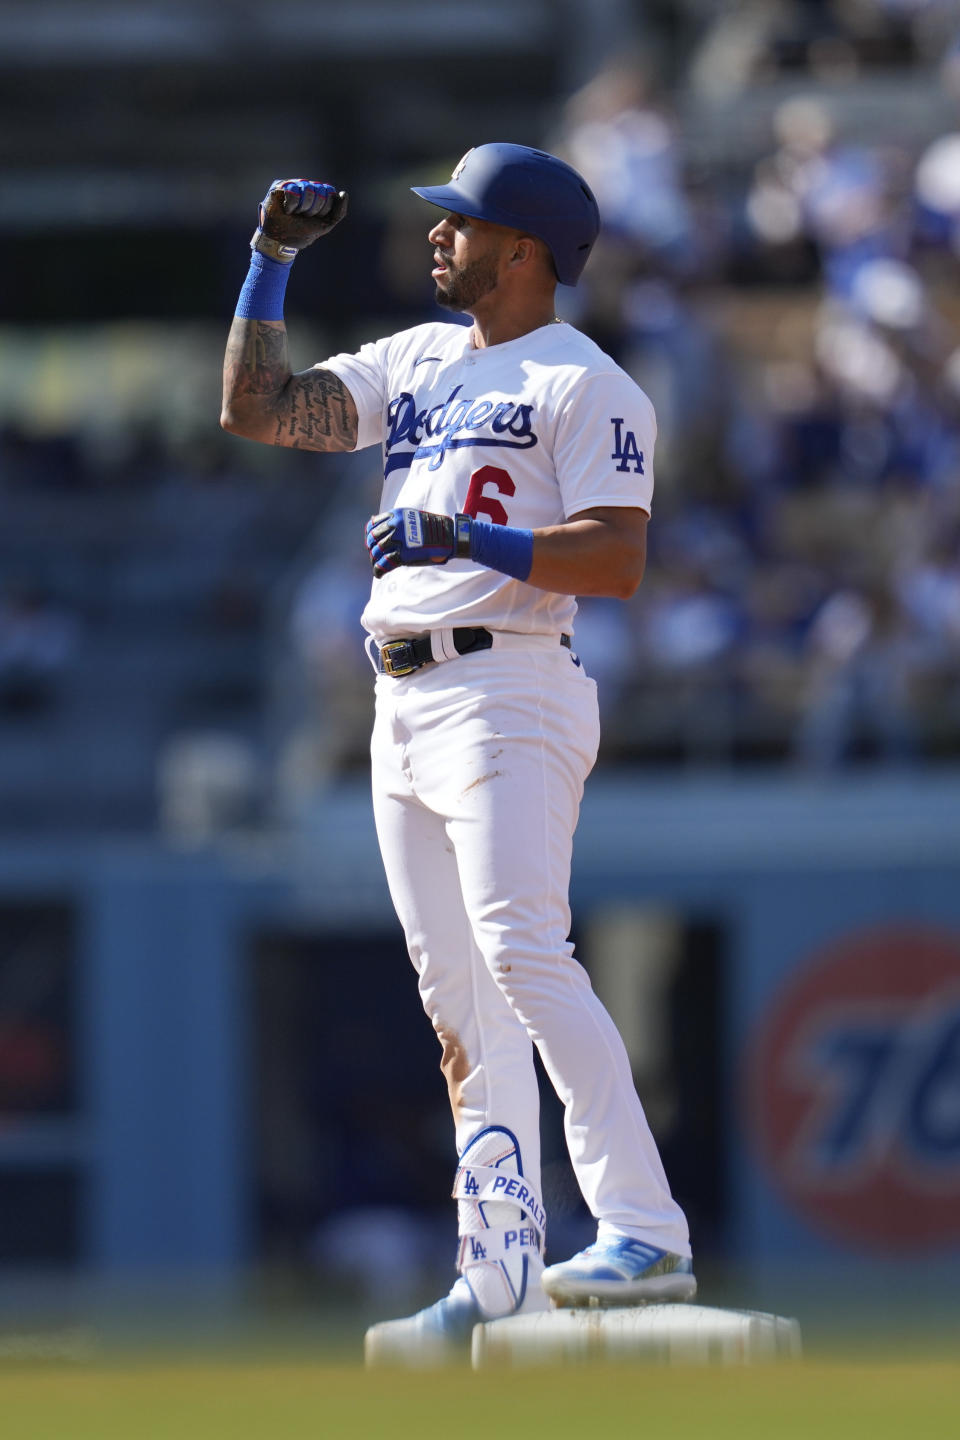 Los Angeles Dodgers' David Peralta (6) celebrates after doubling during the second inning of a baseball game against the New York Yankees in Los Angeles, Sunday, June 4, 2023. (AP Photo/Ashley Landis)